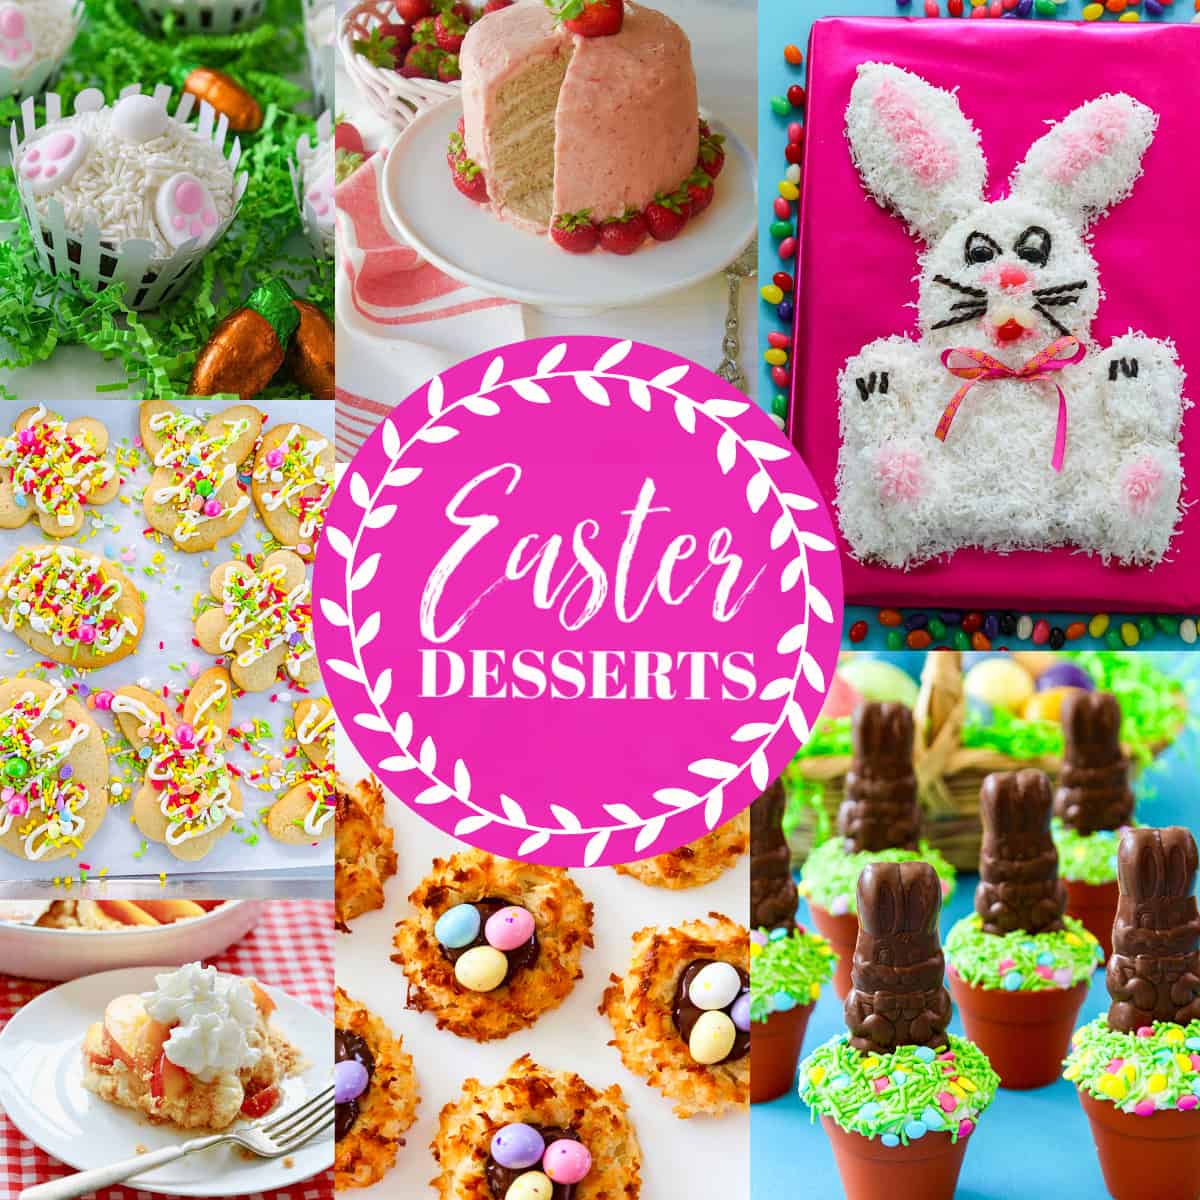 An ad for Easter Dessert recipes showing bright colored bunny cupcakes and Easter bunny cakes and desserts.